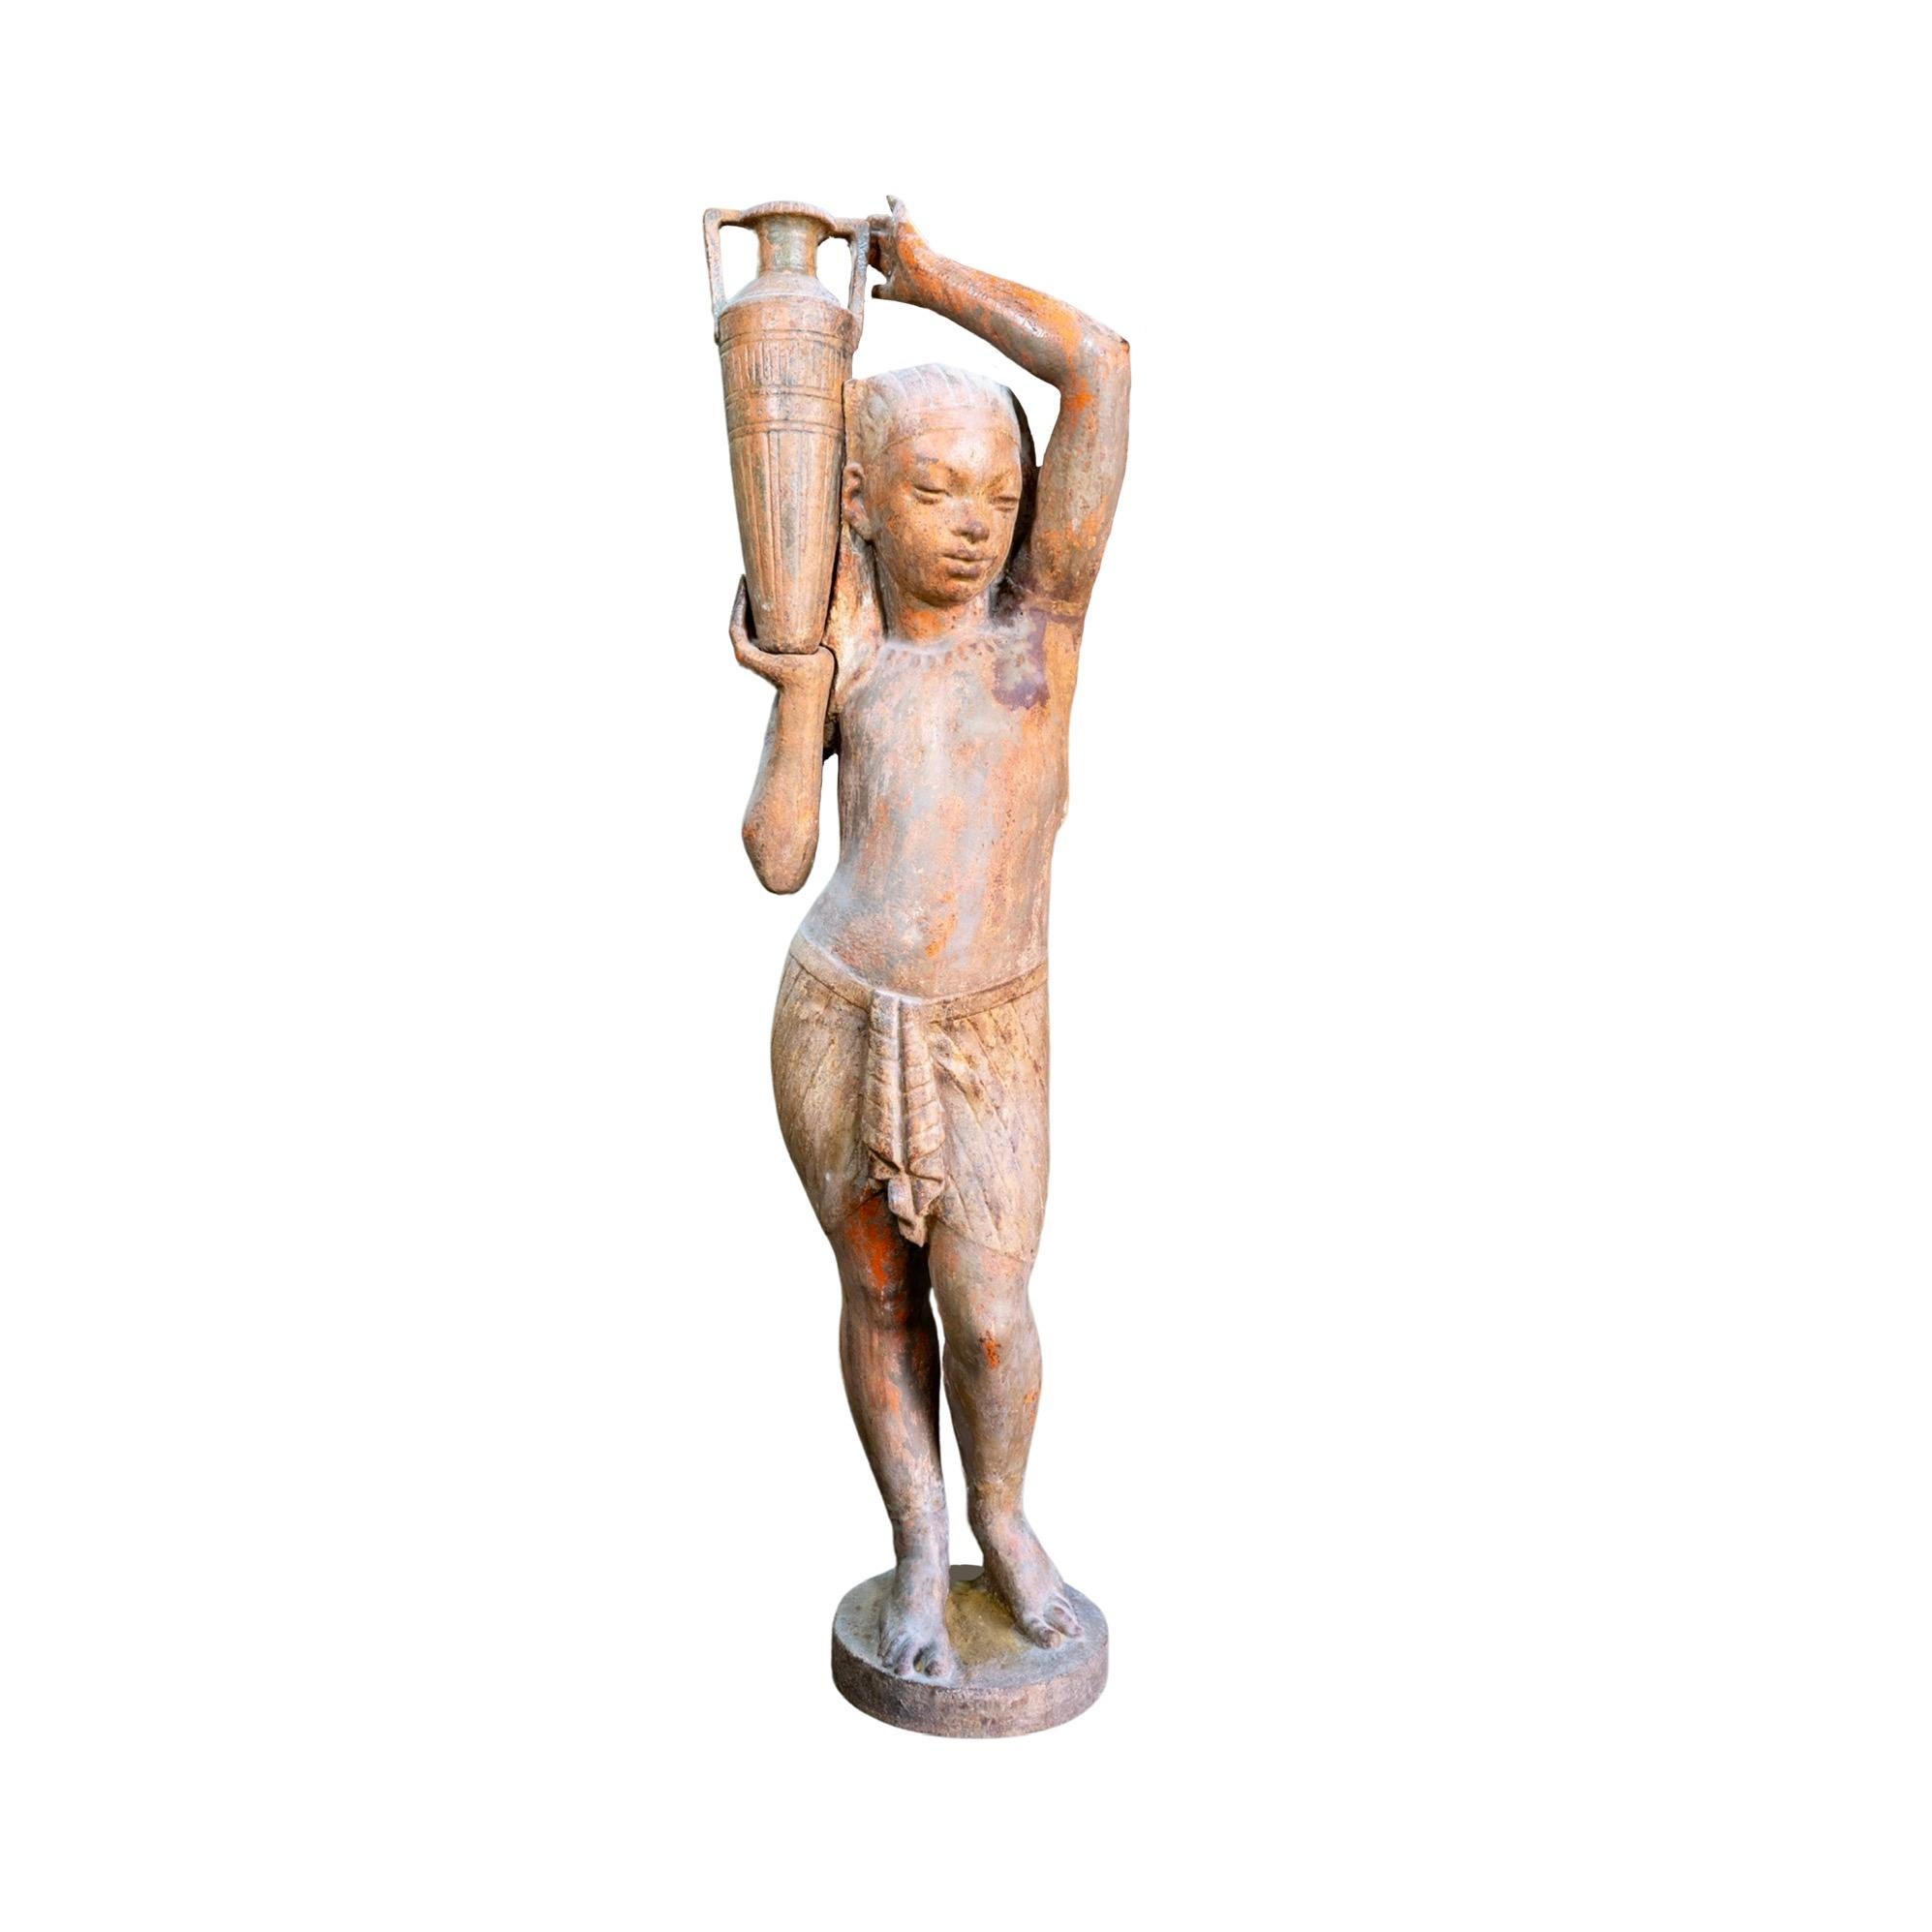 Expertly crafted in the 1890s, this French Iron Egyptian Water Bearer Sculpture showcases exquisite solid cast iron construction. With a beautiful patina wear that adds character, this sculpture is a nod to ancient Egyptian art. Elevate your home